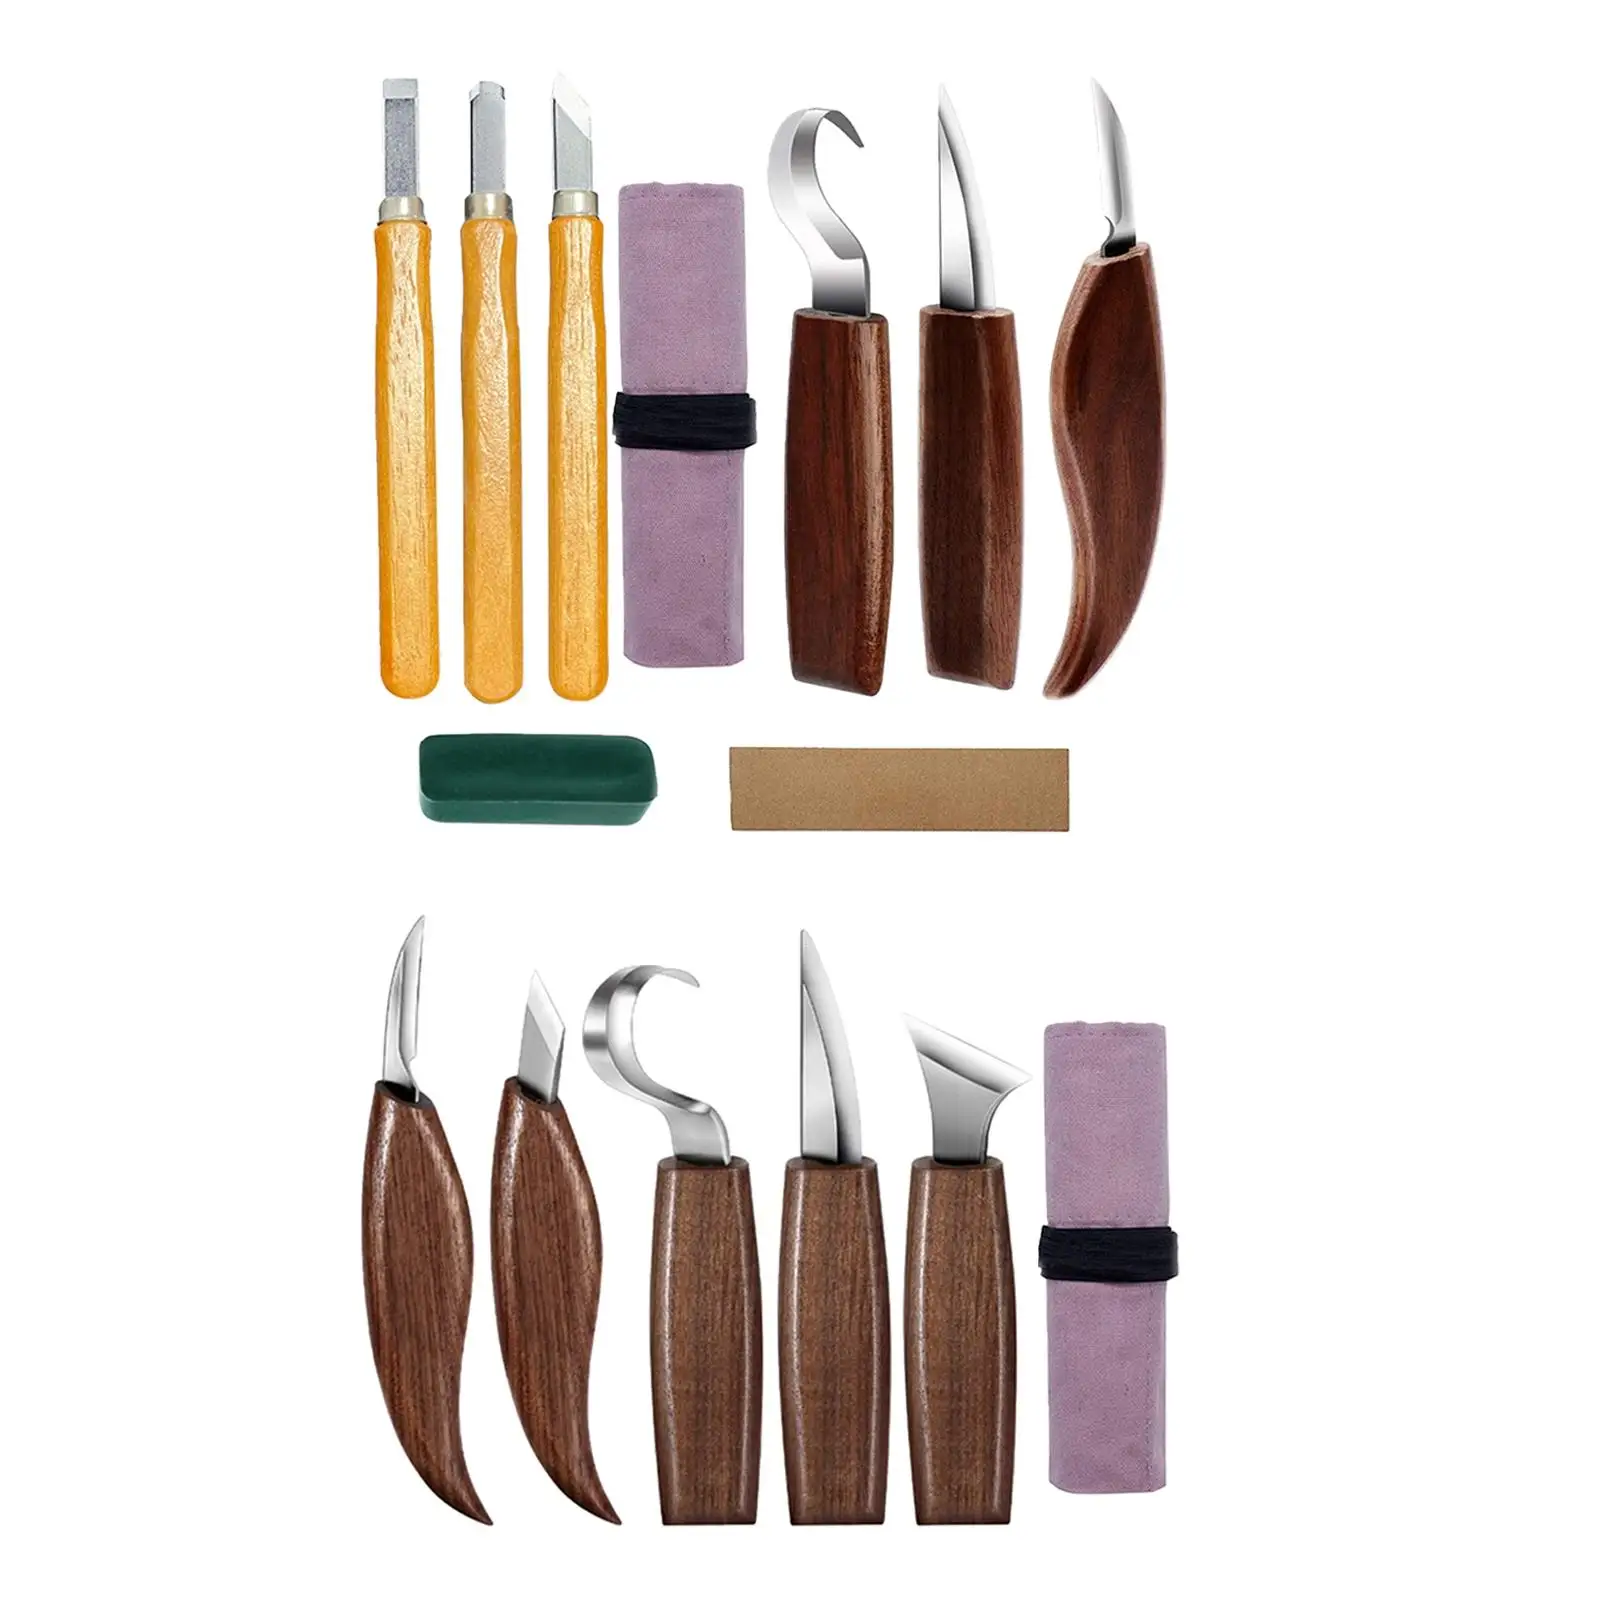 Professional Wood Carving Tools Set Woodworking Hook Carving Knife Hand Tool Crafts Detail Cutter DIY Beginners Kids Adults